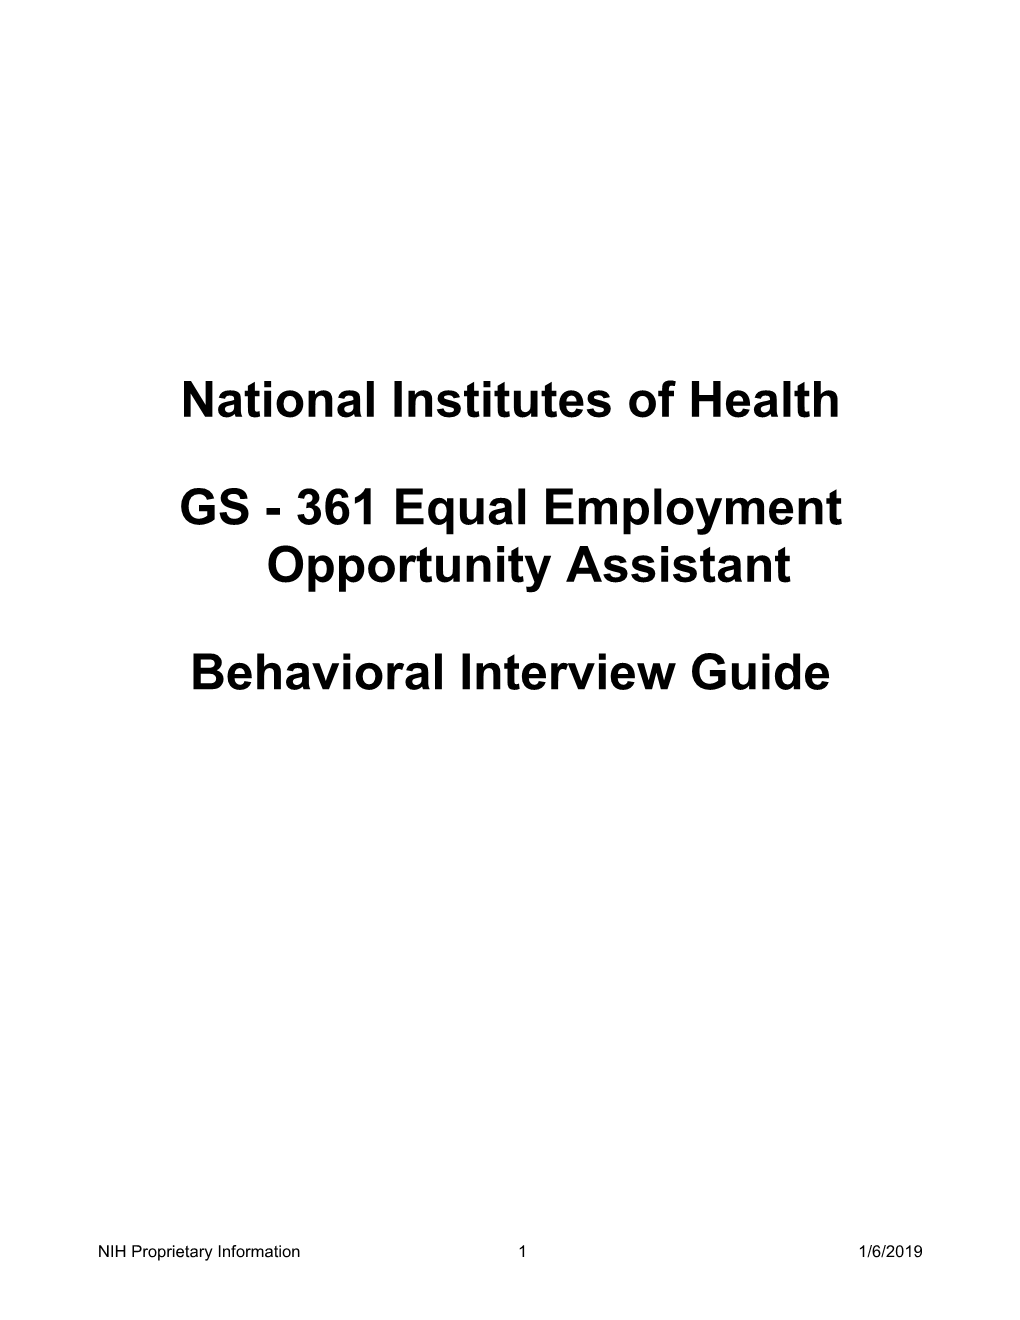 NIH - Equal Employment Opportunity GS-361 Interview Guide